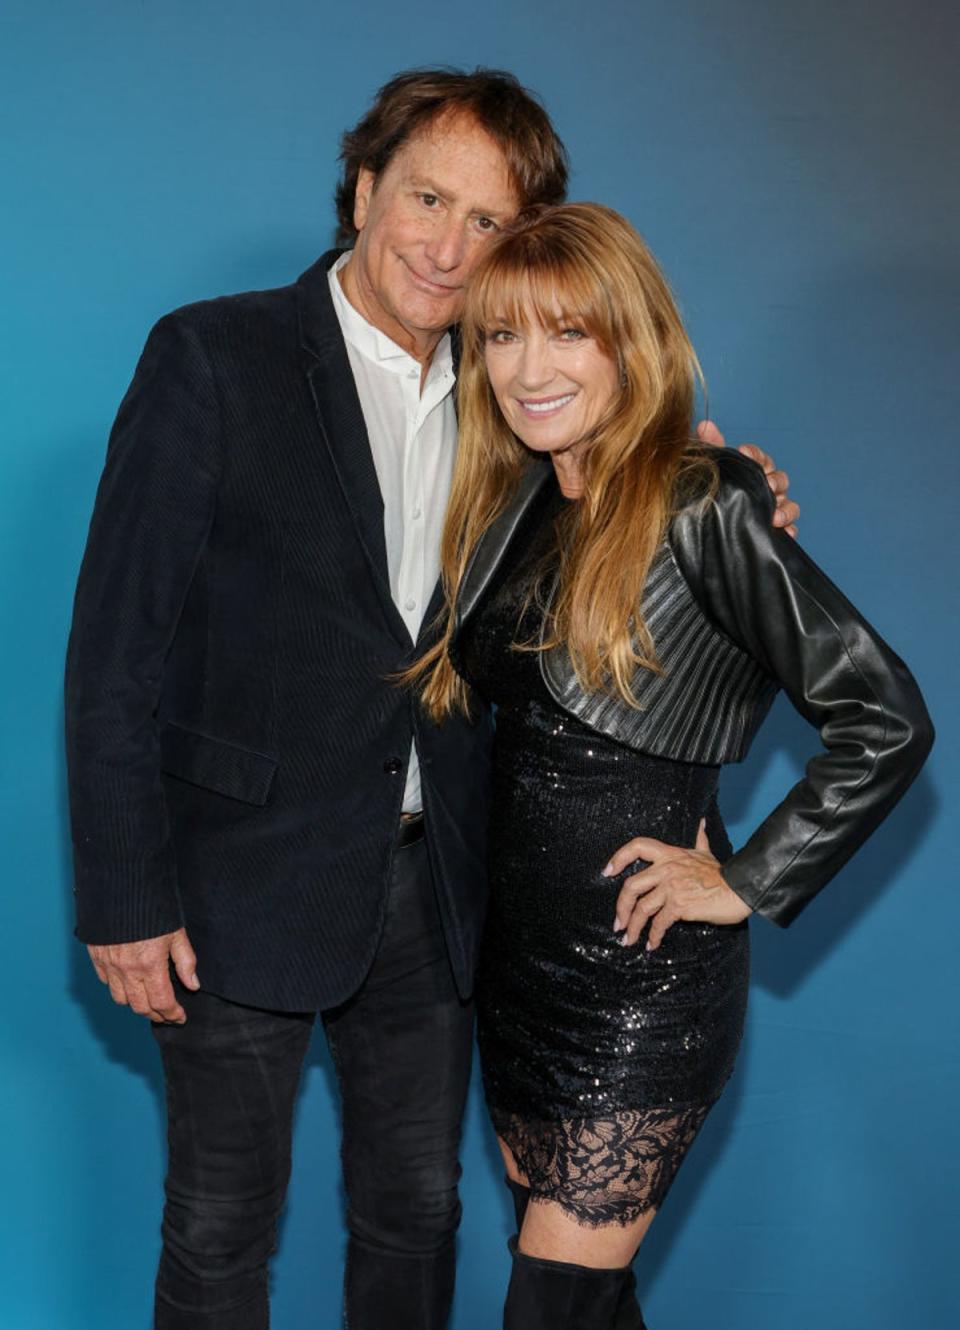 Seymour says she and her musician boyfriend Zambetti understand each other needs and desires in the bedroom (Getty Images)